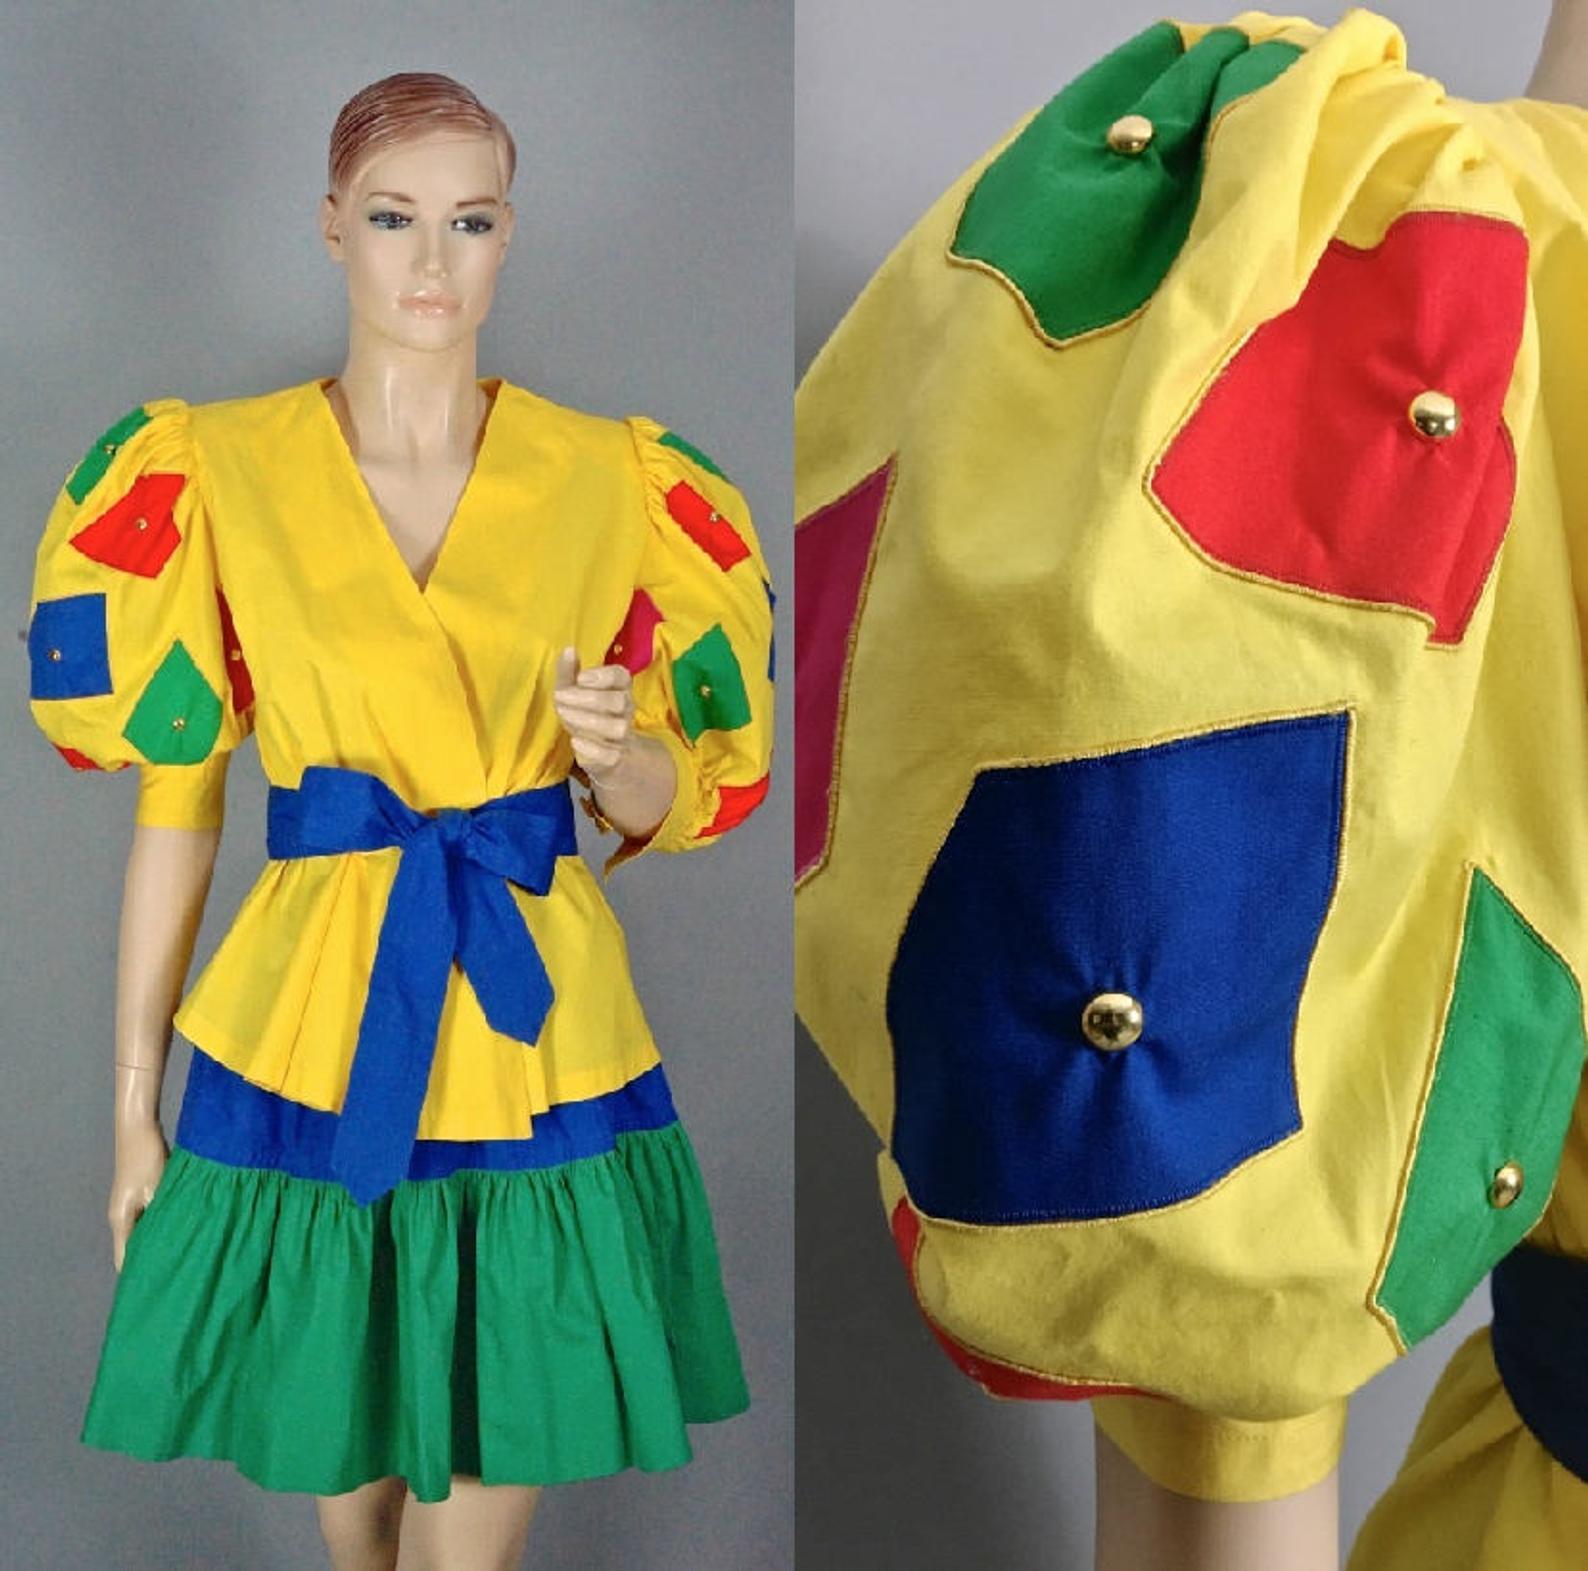 Vintage GIVENCHY NOUVELLE BOUTIQUE Color Block Balloon Sleeves Blouse Skirt Suit Ensemble

Measurements taken laid flat, please double bust, waist and hips:
BLOUSE
Shoulder: 14.96 inches (38 cm)
Sleeves: 18.11 inches (46 cm)
Bust: 16.53 inches (42